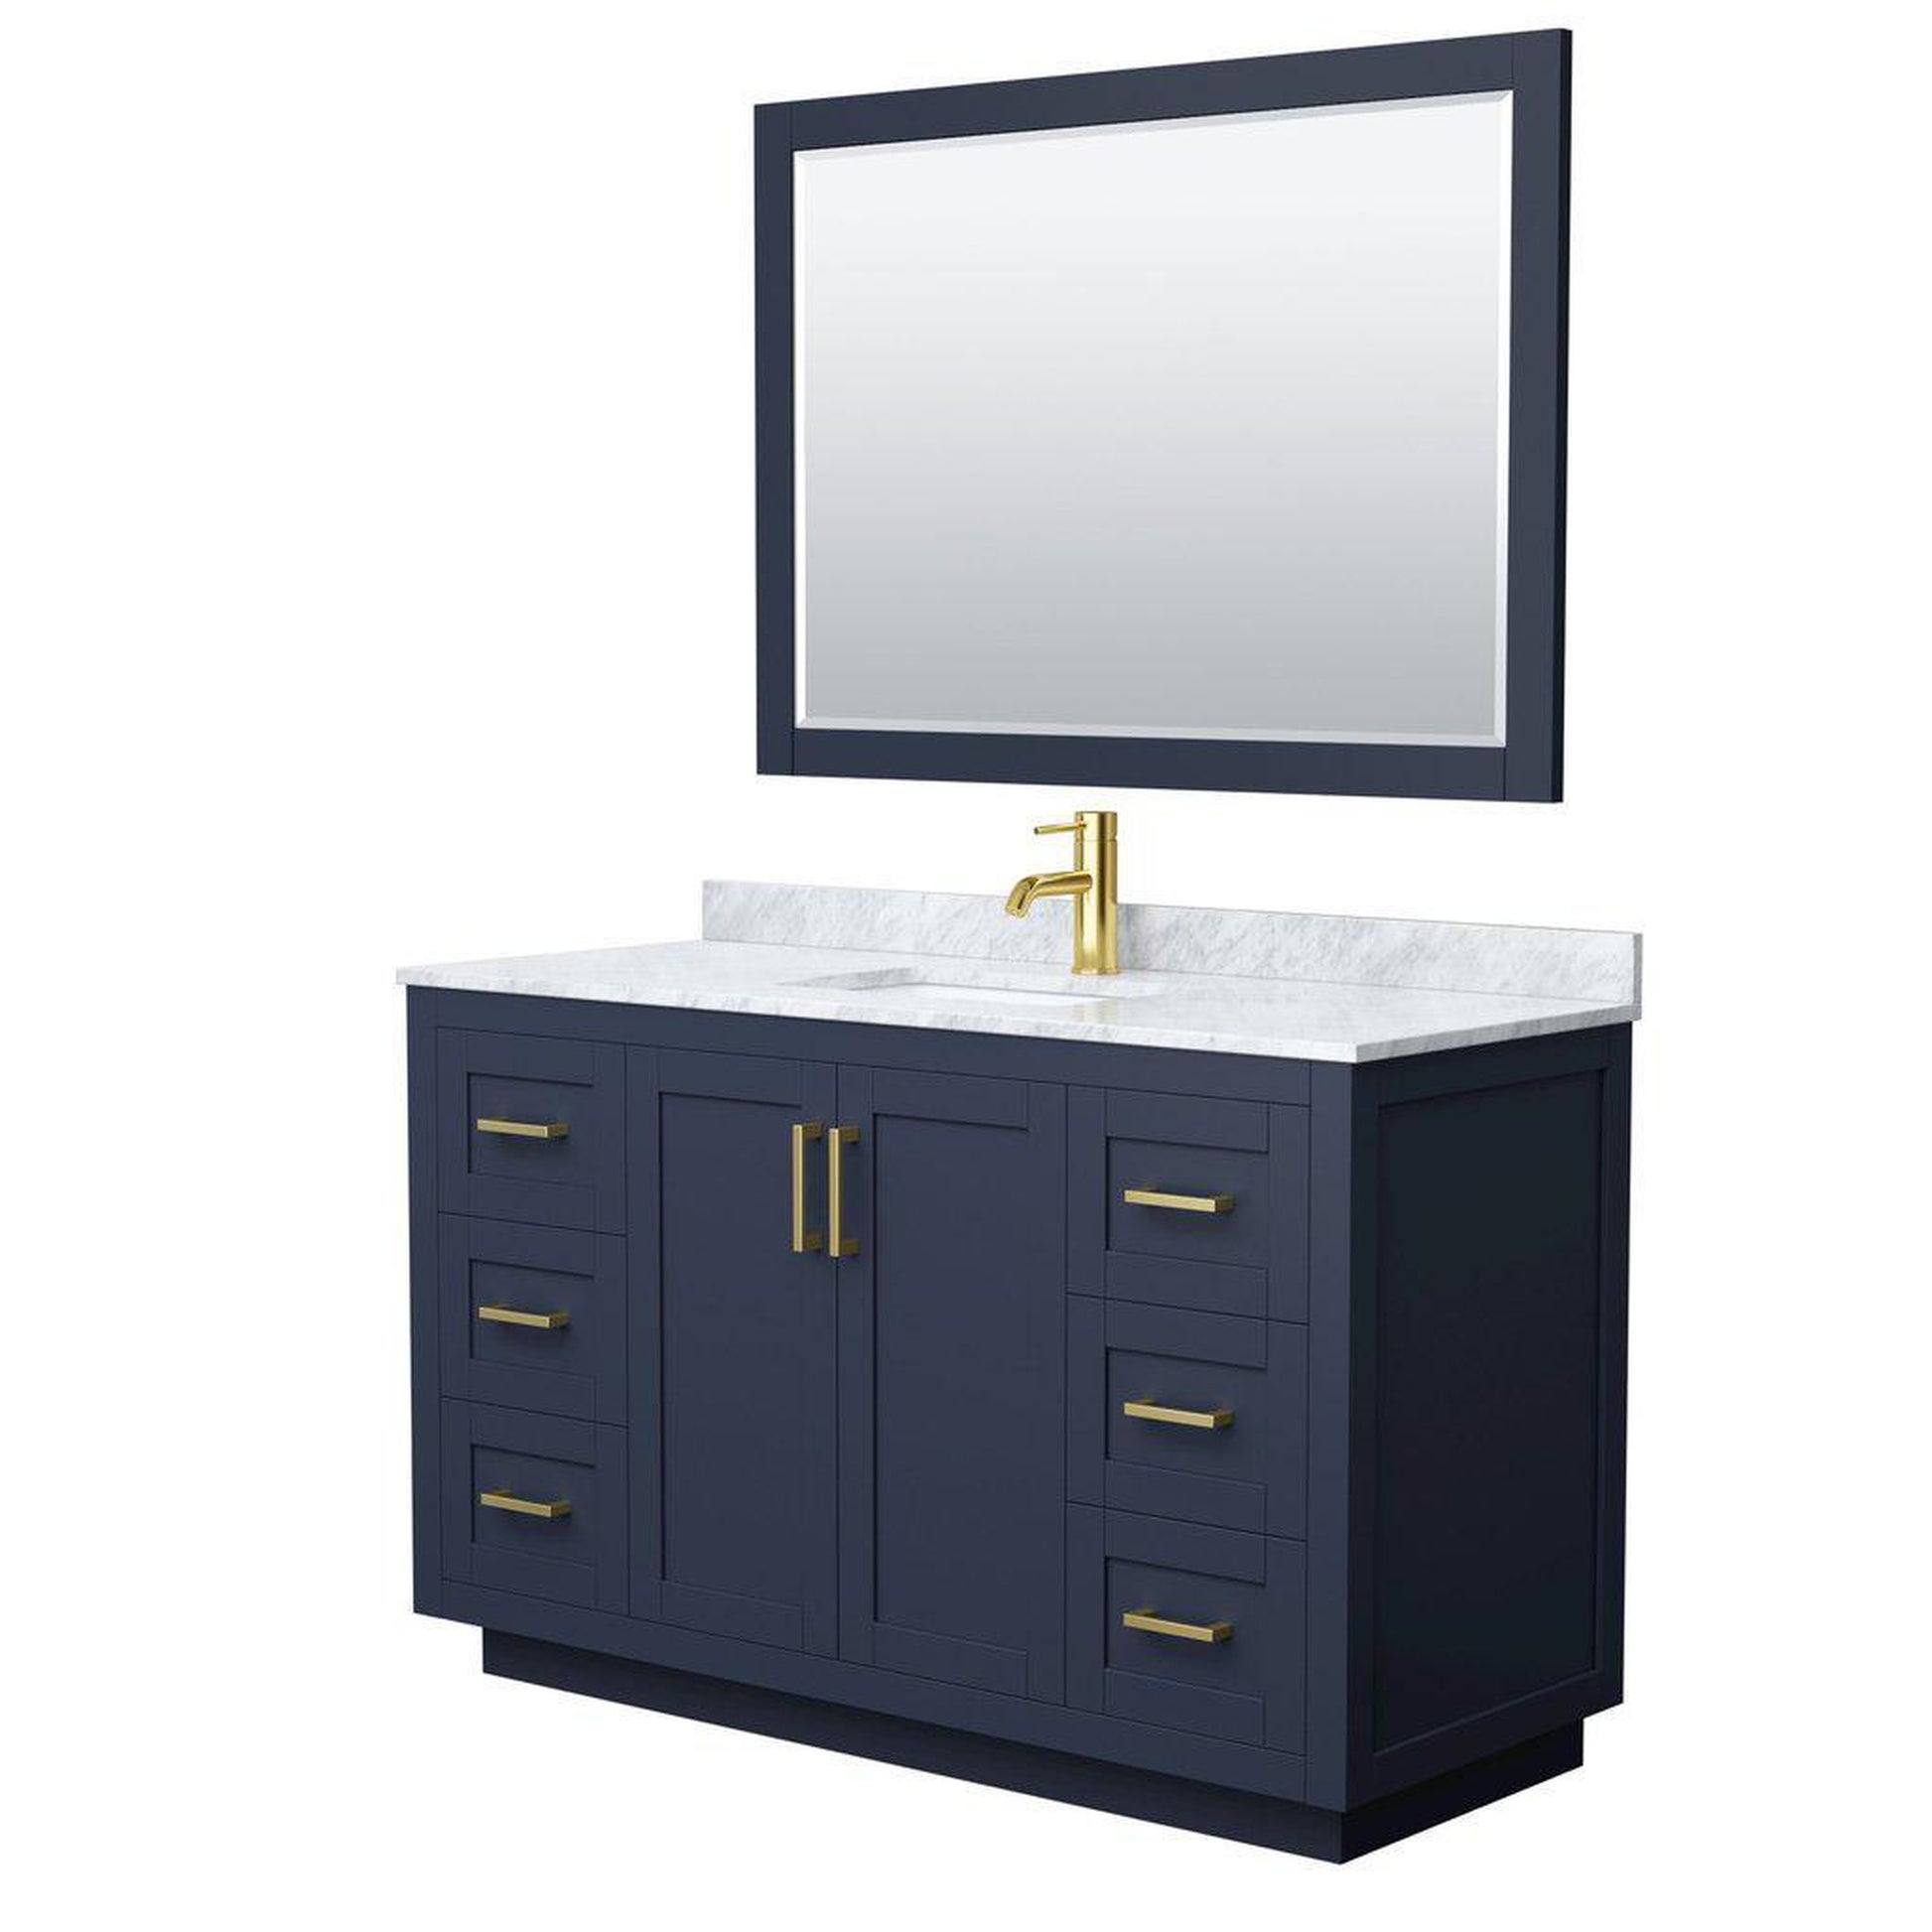 Wyndham Collection Miranda 54" Single Bathroom Dark Blue Vanity Set With White Carrara Marble Countertop, Undermount Square Sink, 46" Mirror And Brushed Gold Trim